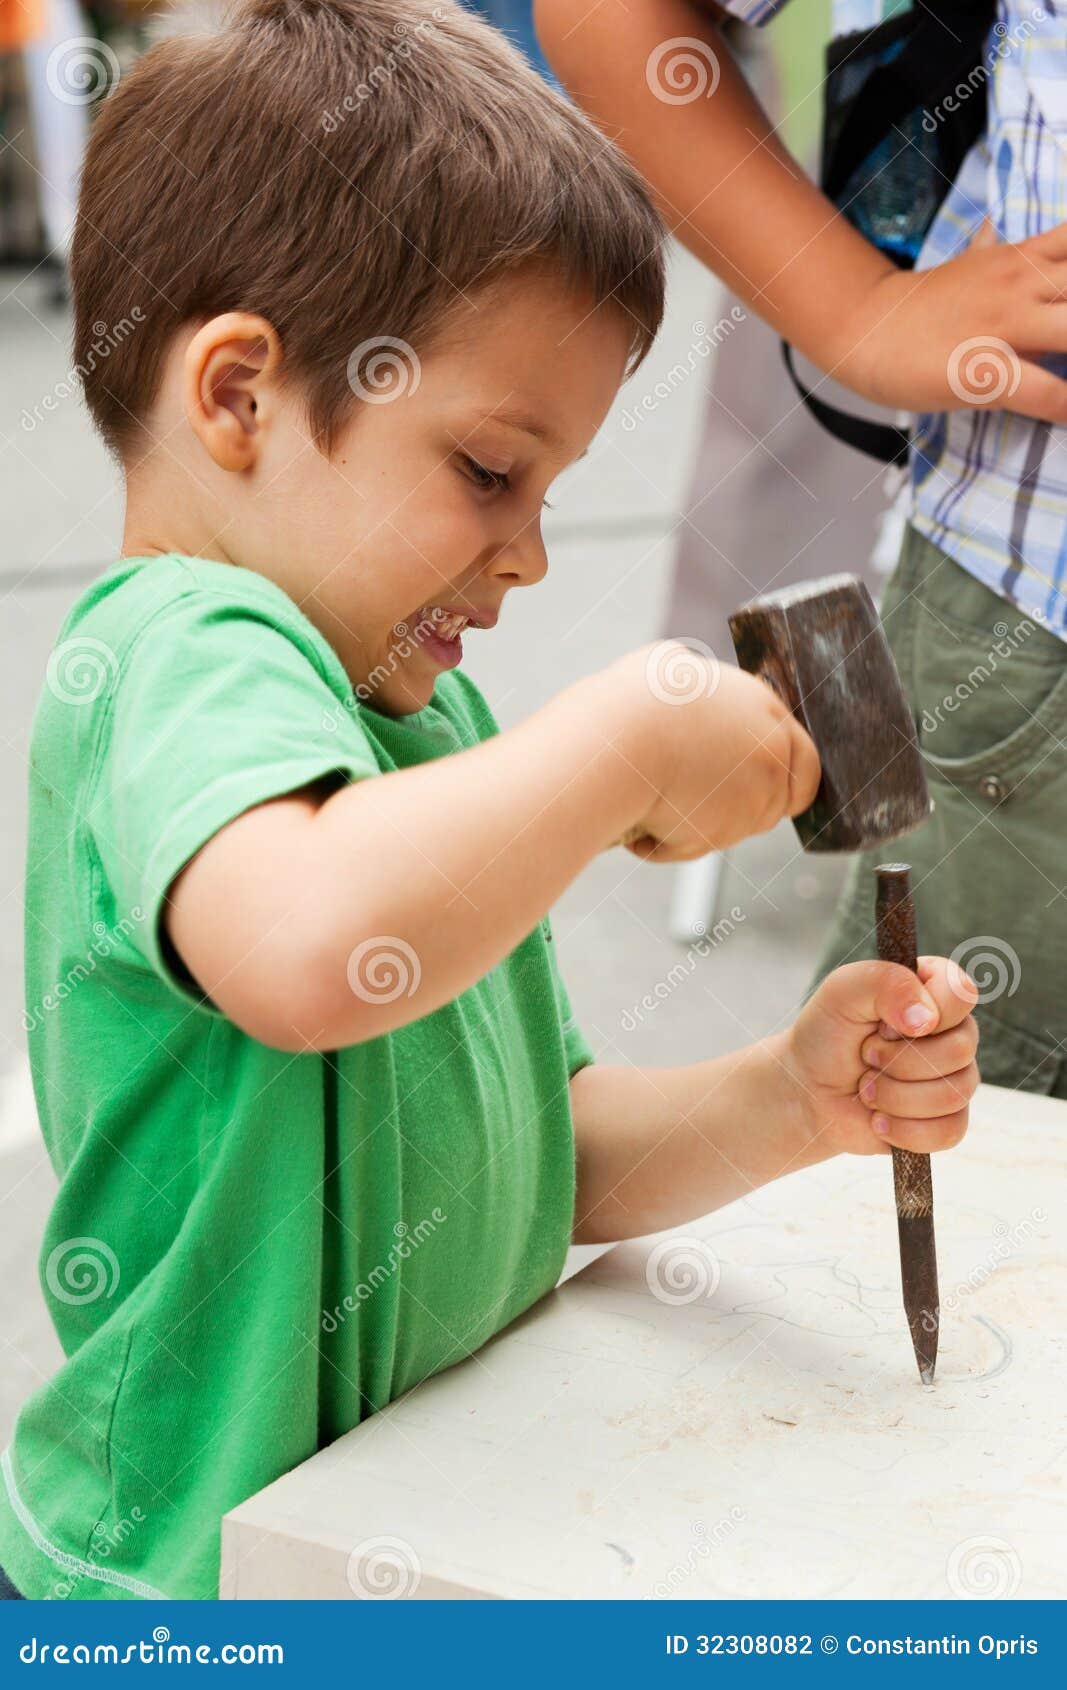 child sculptor with chisel